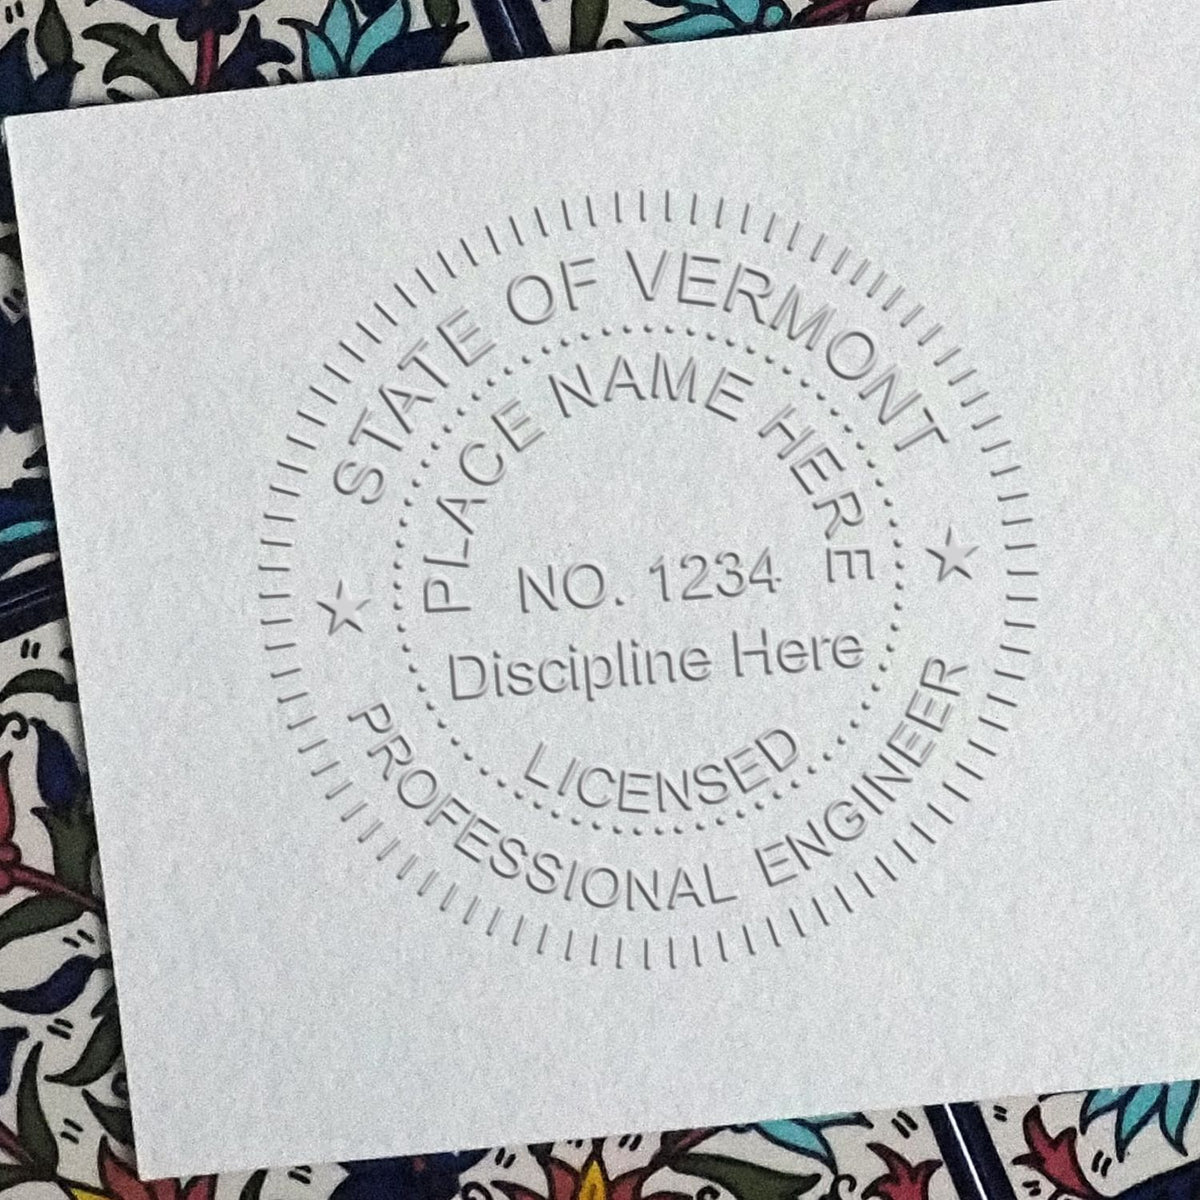 An alternative view of the State of Vermont Extended Long Reach Engineer Seal stamped on a sheet of paper showing the image in use